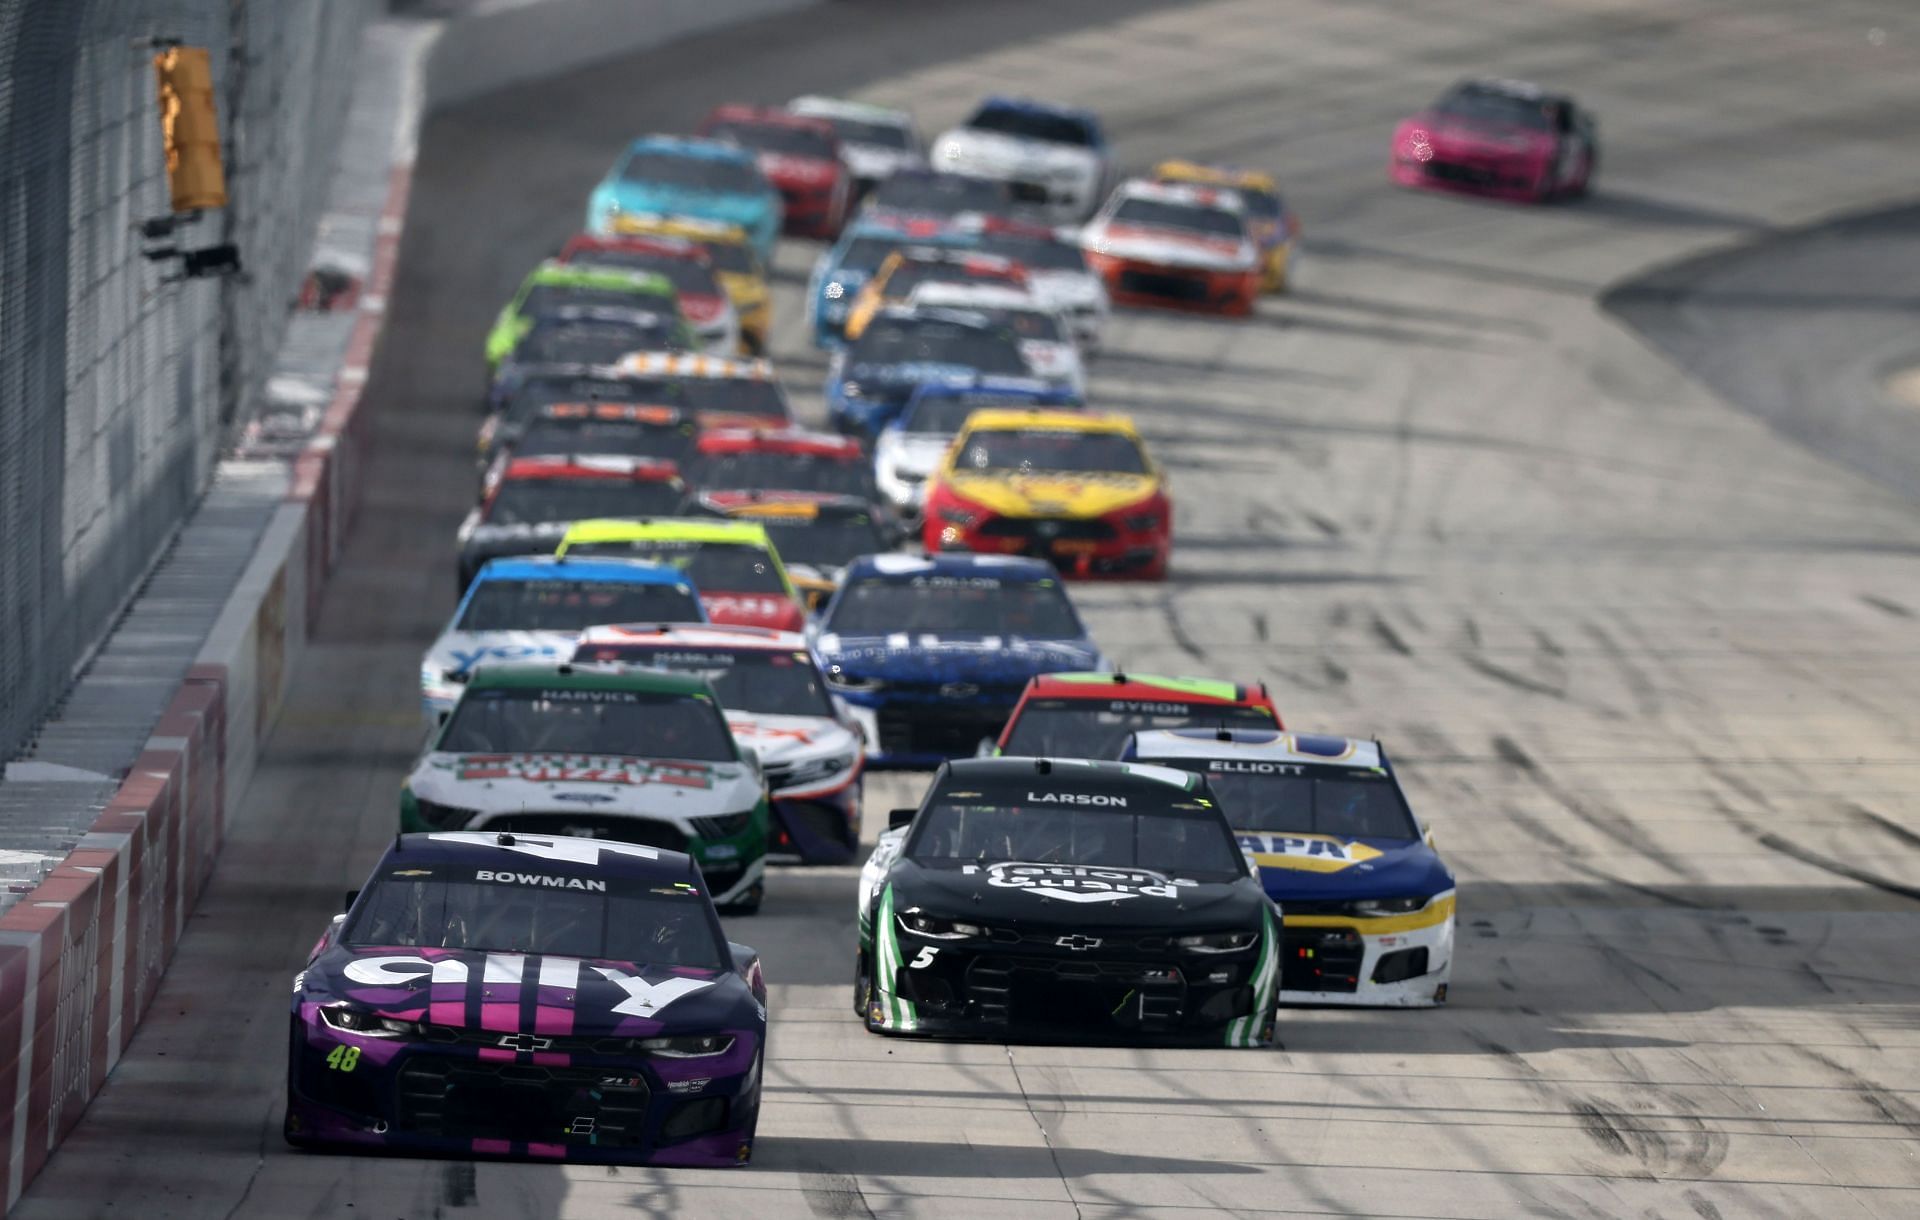 Alex Bowman leads the field during the NASCAR Cup Series Drydene 400 at Dover International Speedway